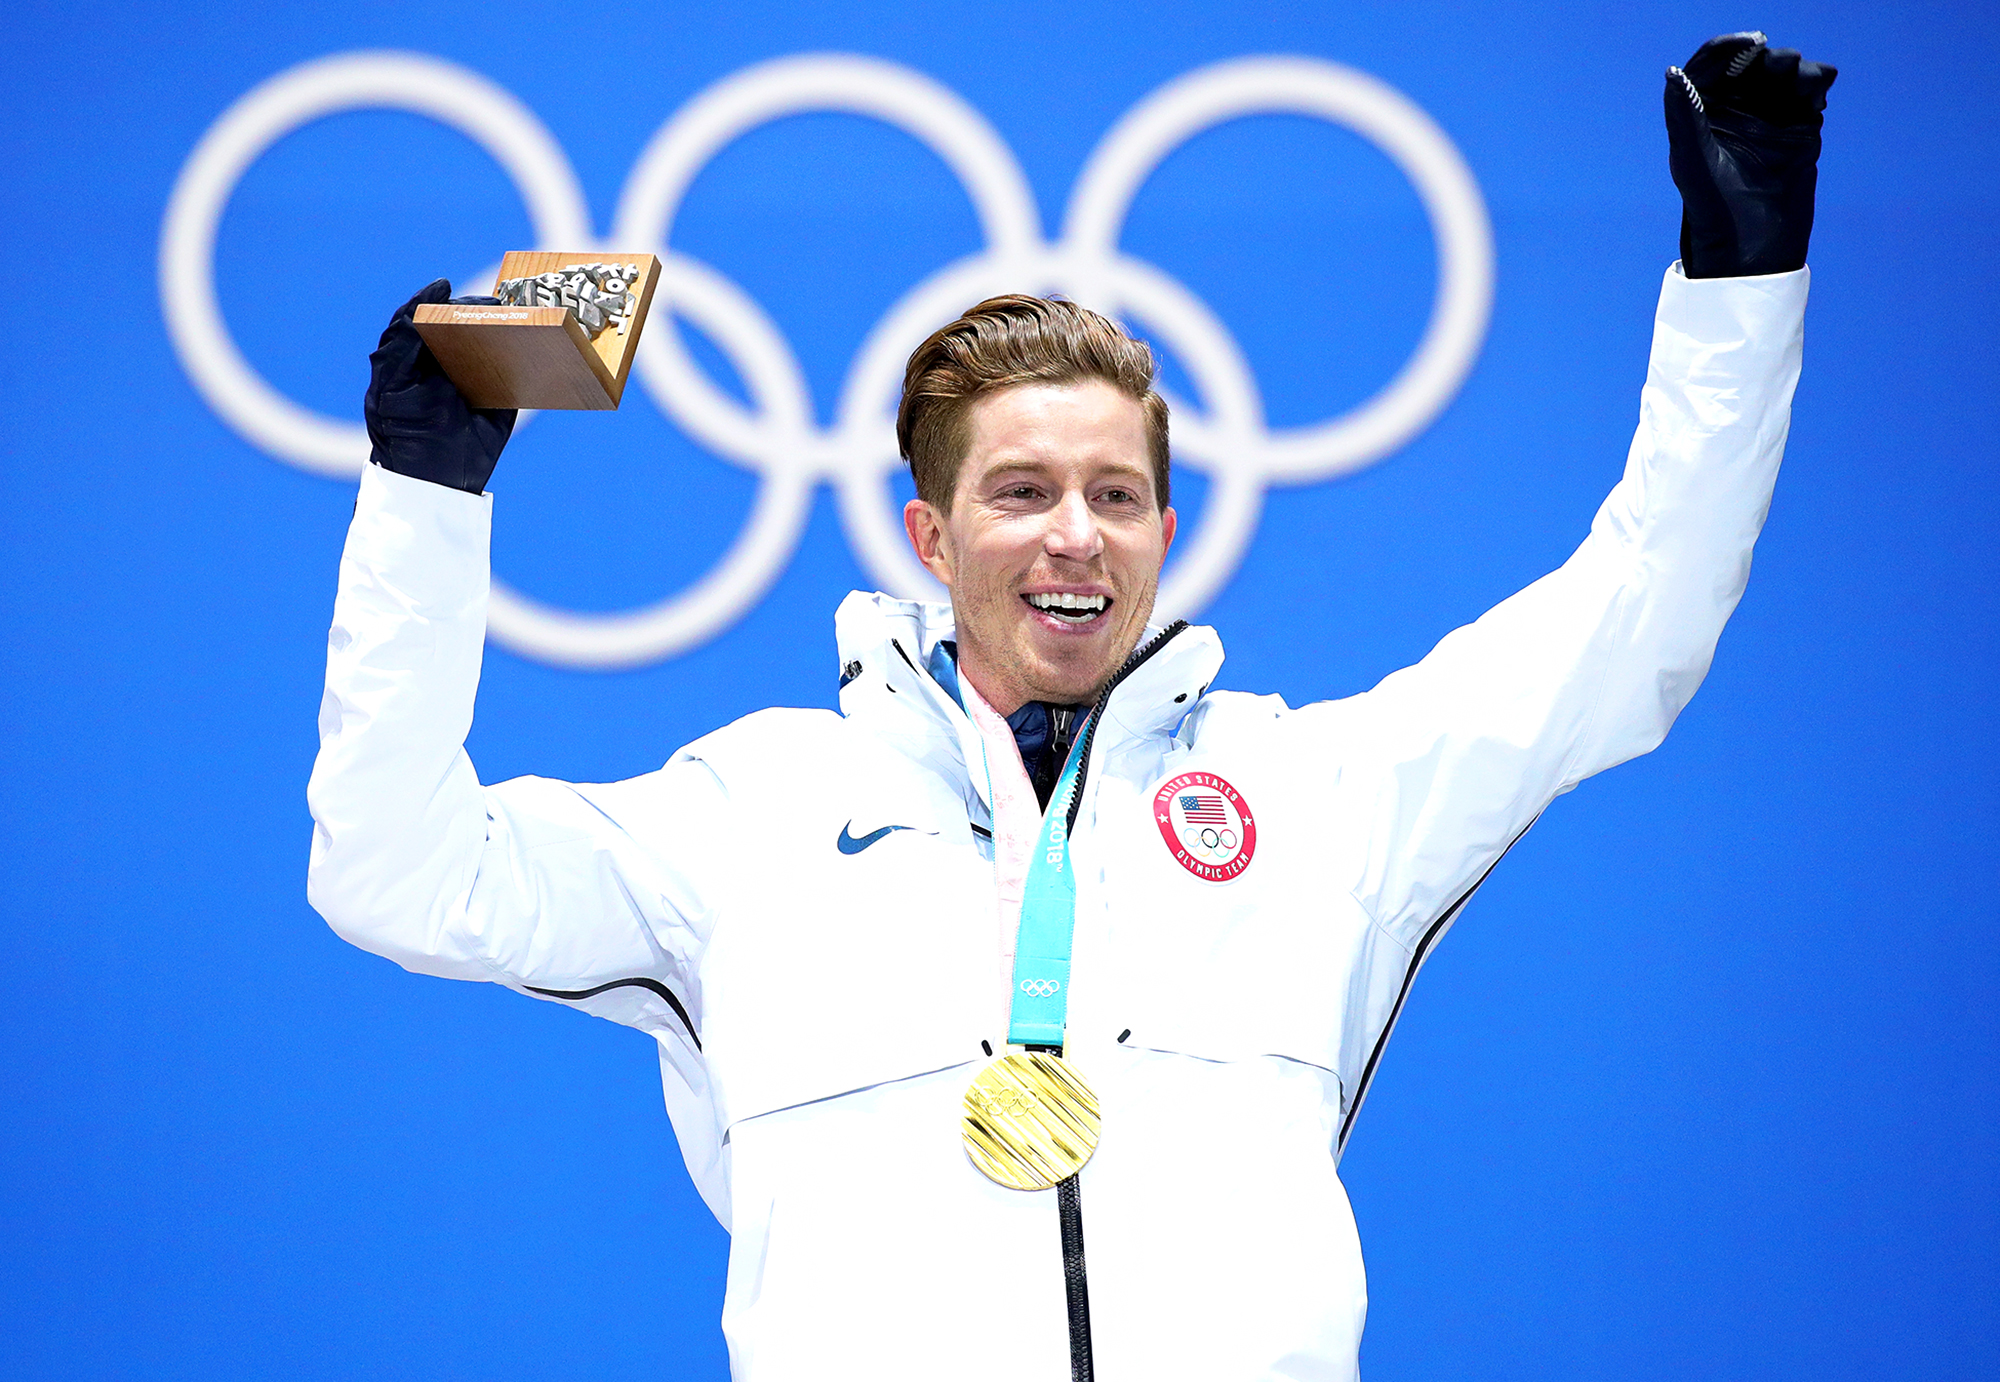 Shaun White finishes fourth as his prolific Olympic career comes to a close